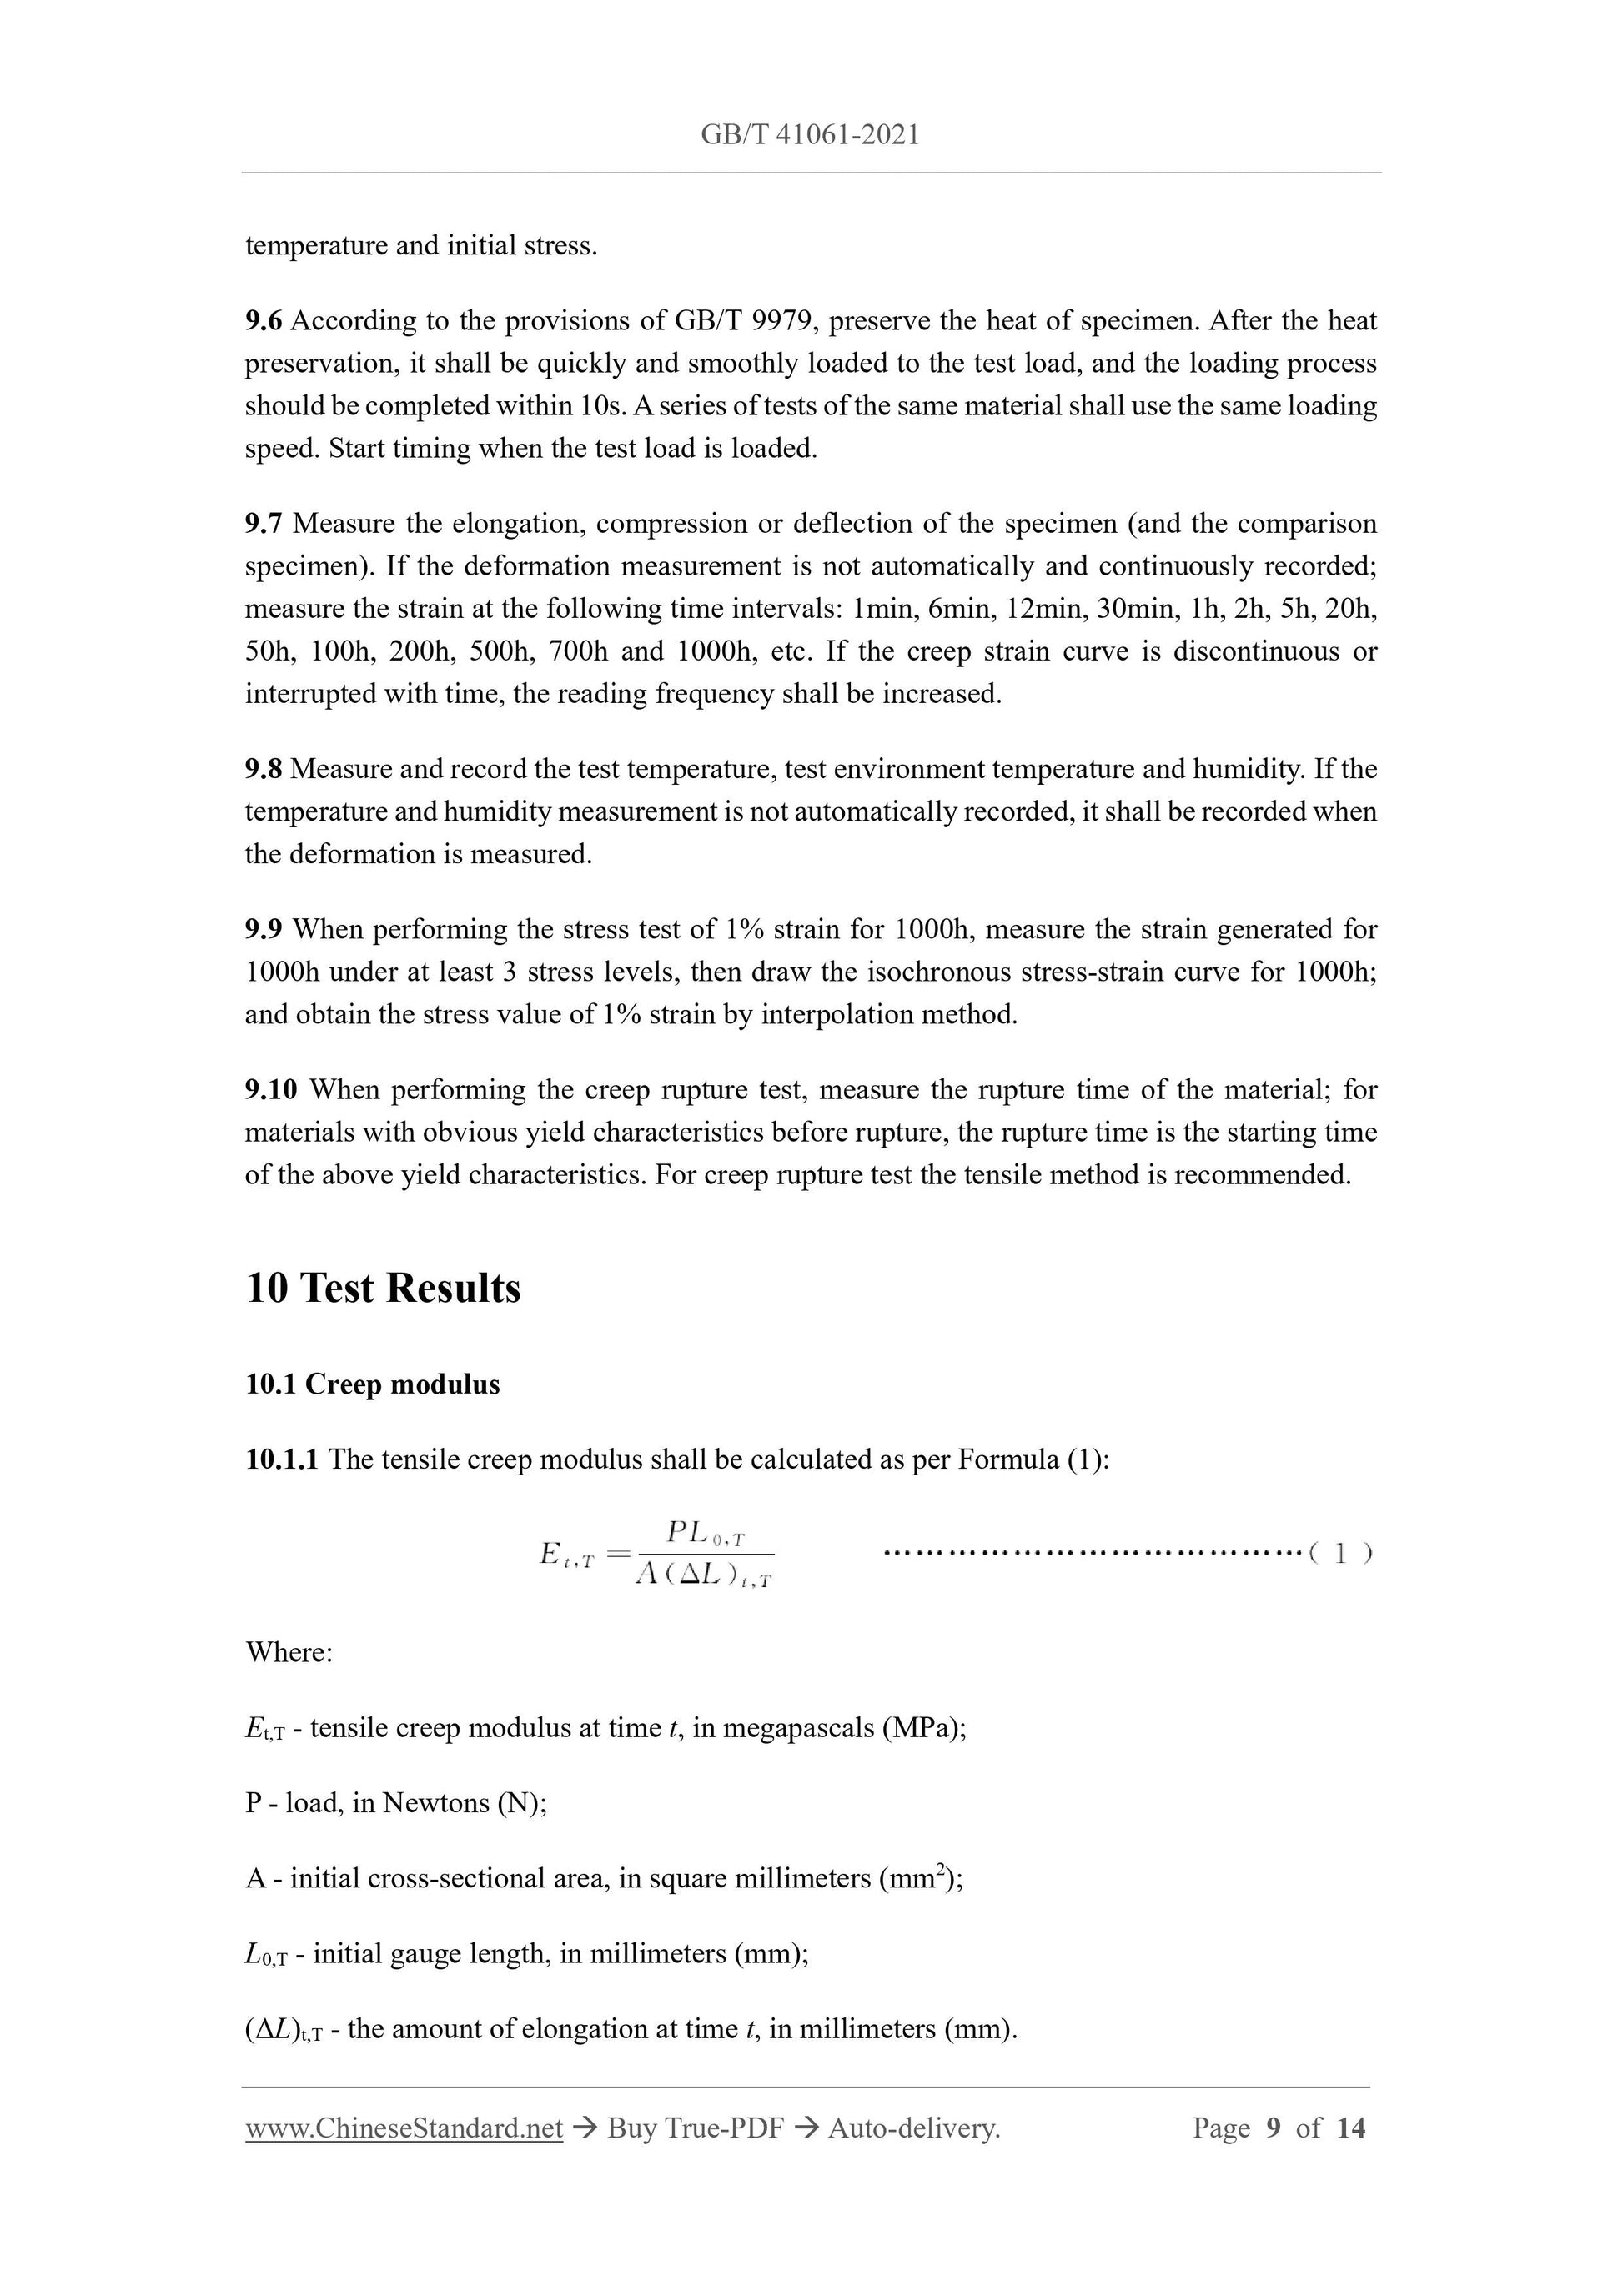 GB/T 41061-2021 Page 6